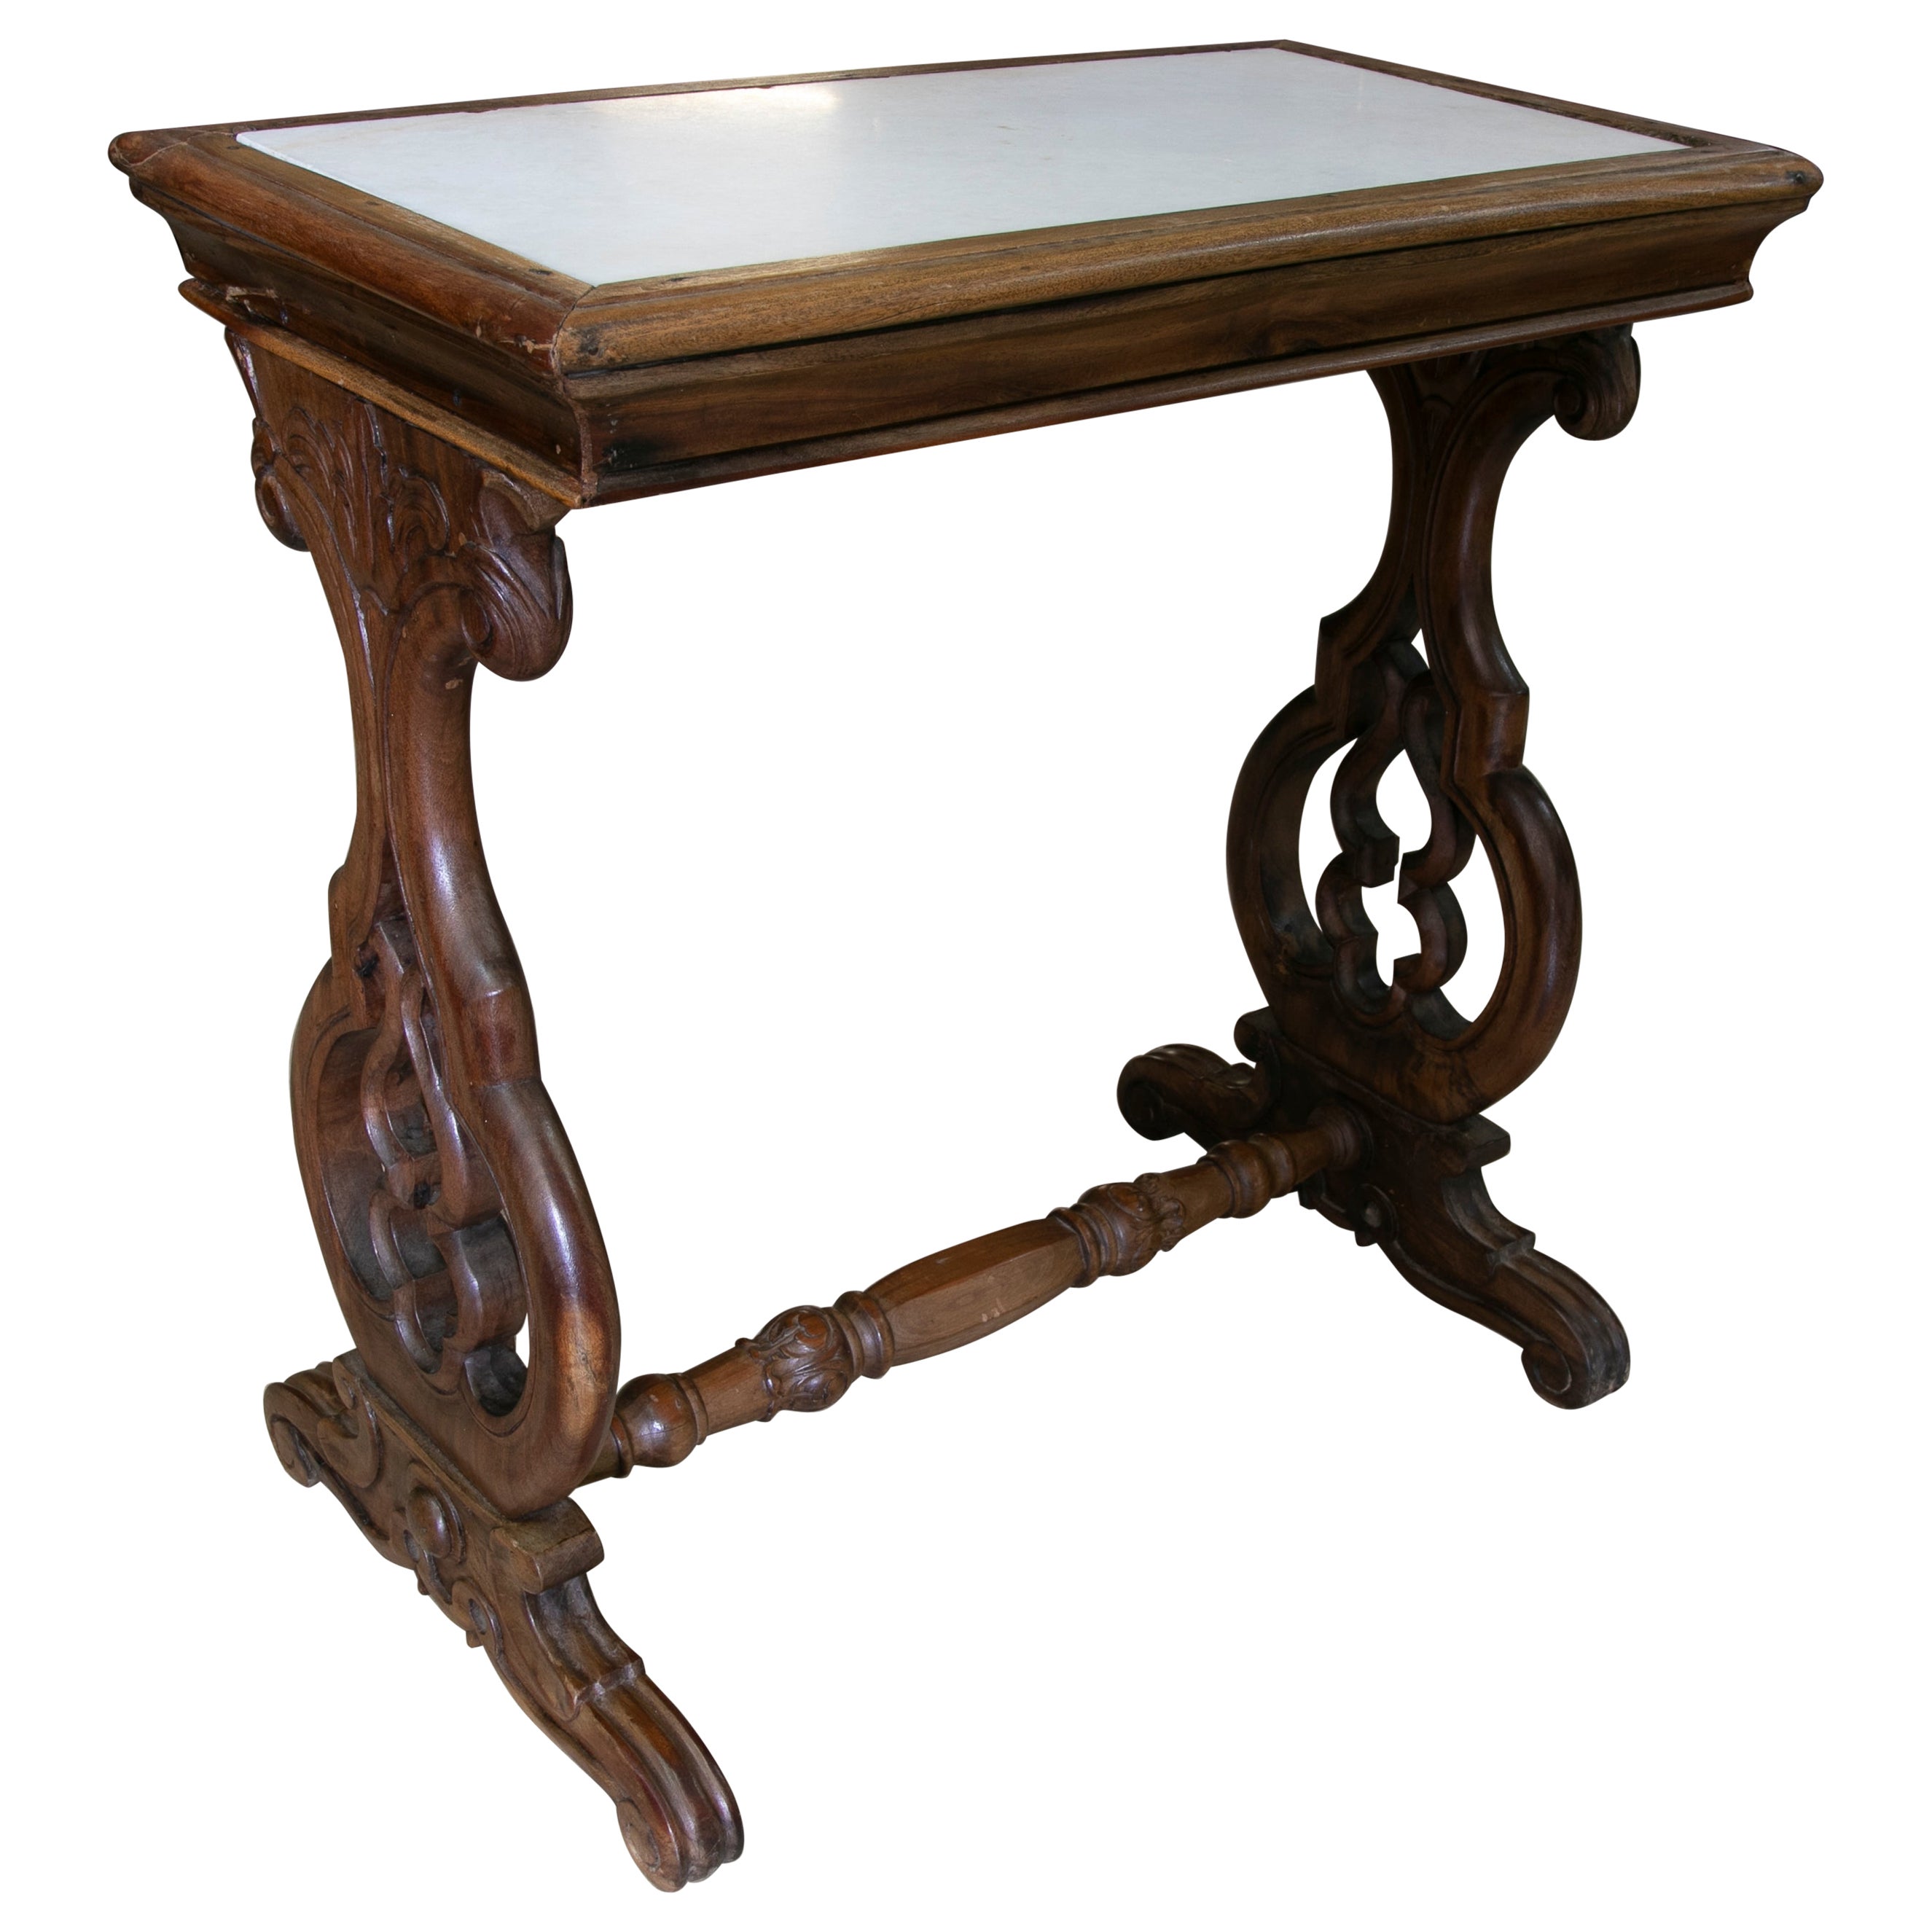 Handcarved Wooden Table with Inlaid Marble Top